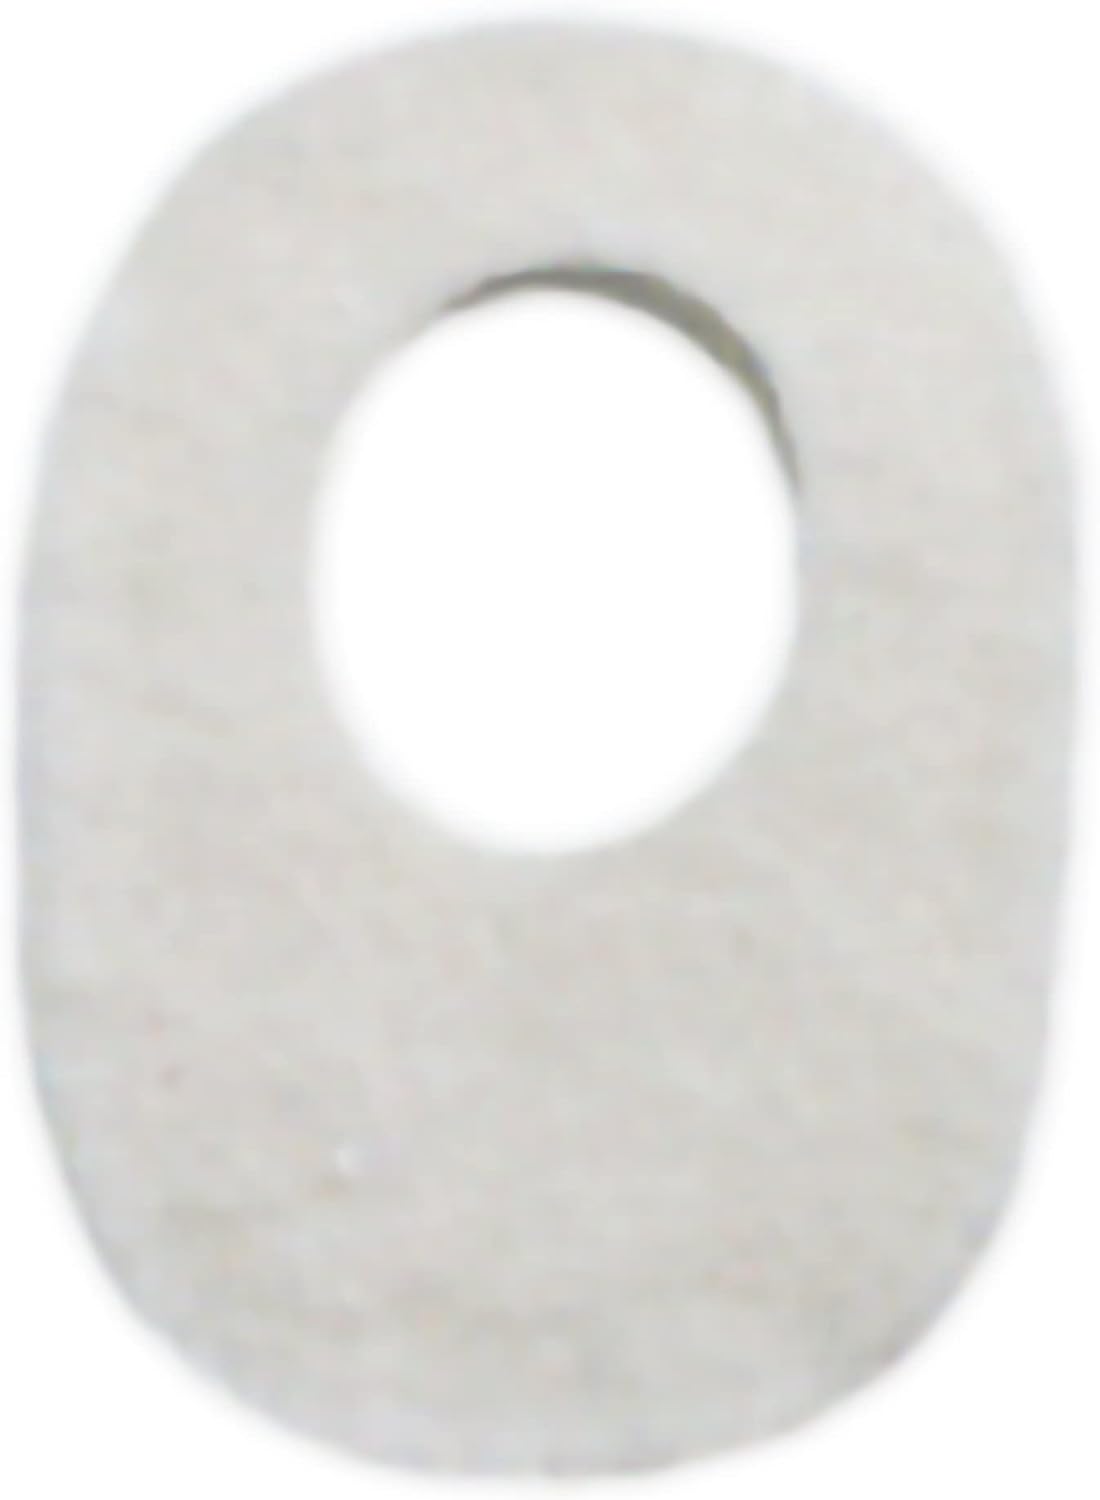 McKesson Corn Pads - Reduce Friction and Pressure on Toes - Felt, Adhesive, White - Size 101-Narrow, 1/8 in, 100 Count